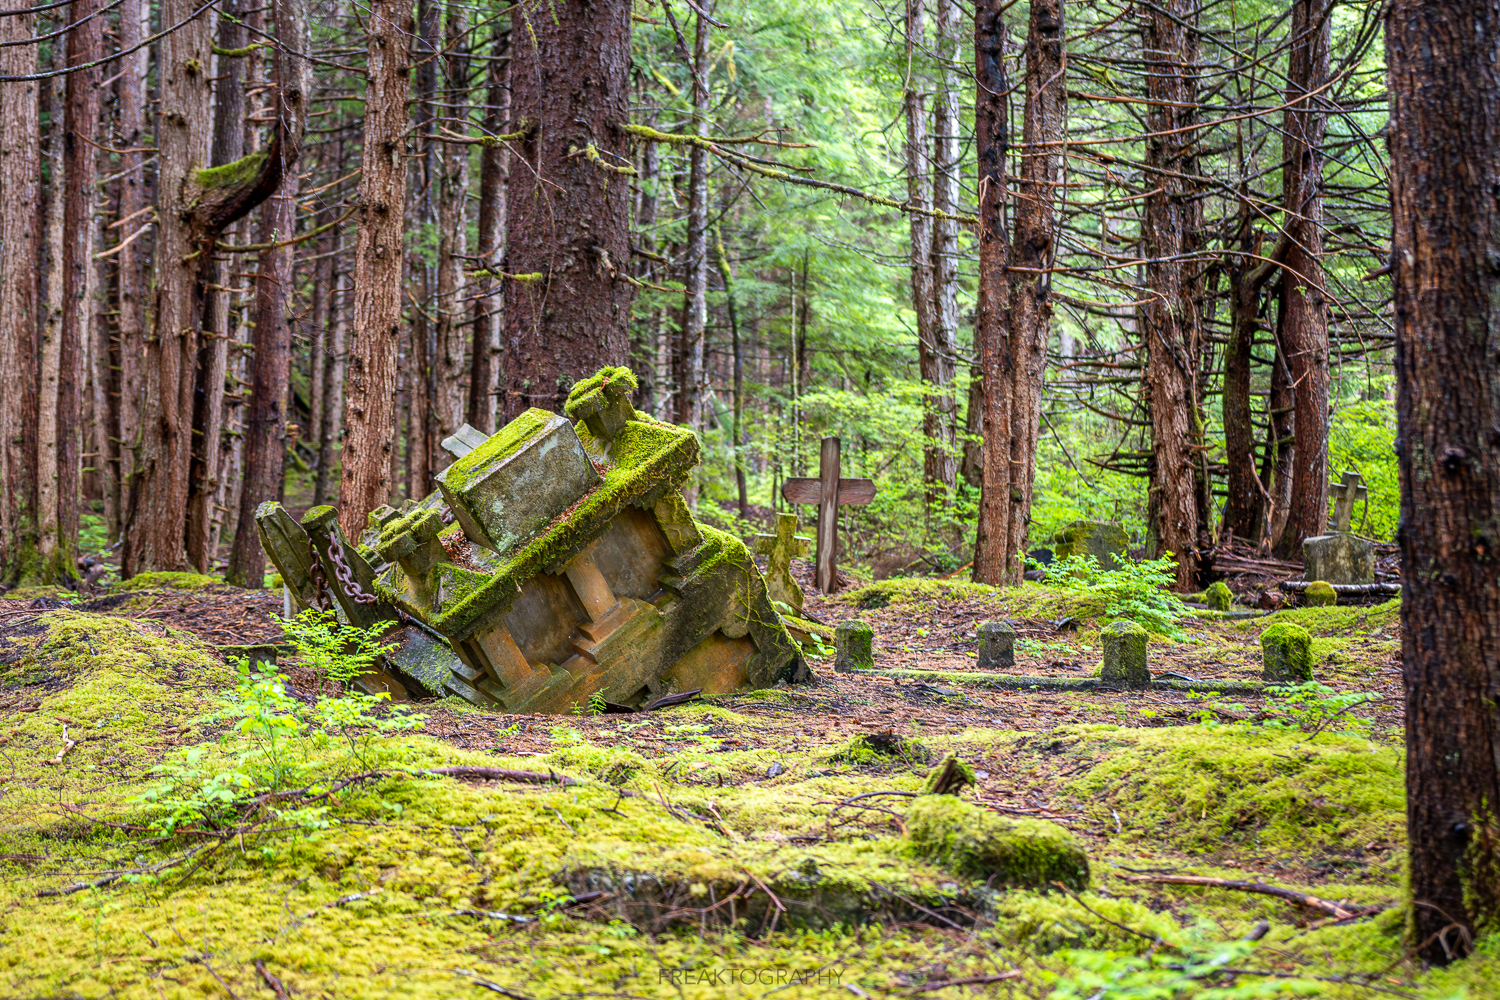 Urban explorer Dave, aka Freaktography, discovers a forgotten cemetery in the ghost town of Anyox, BC, with moss-covered graves of WWI veterans and tragic deaths, sending chills down your spine.